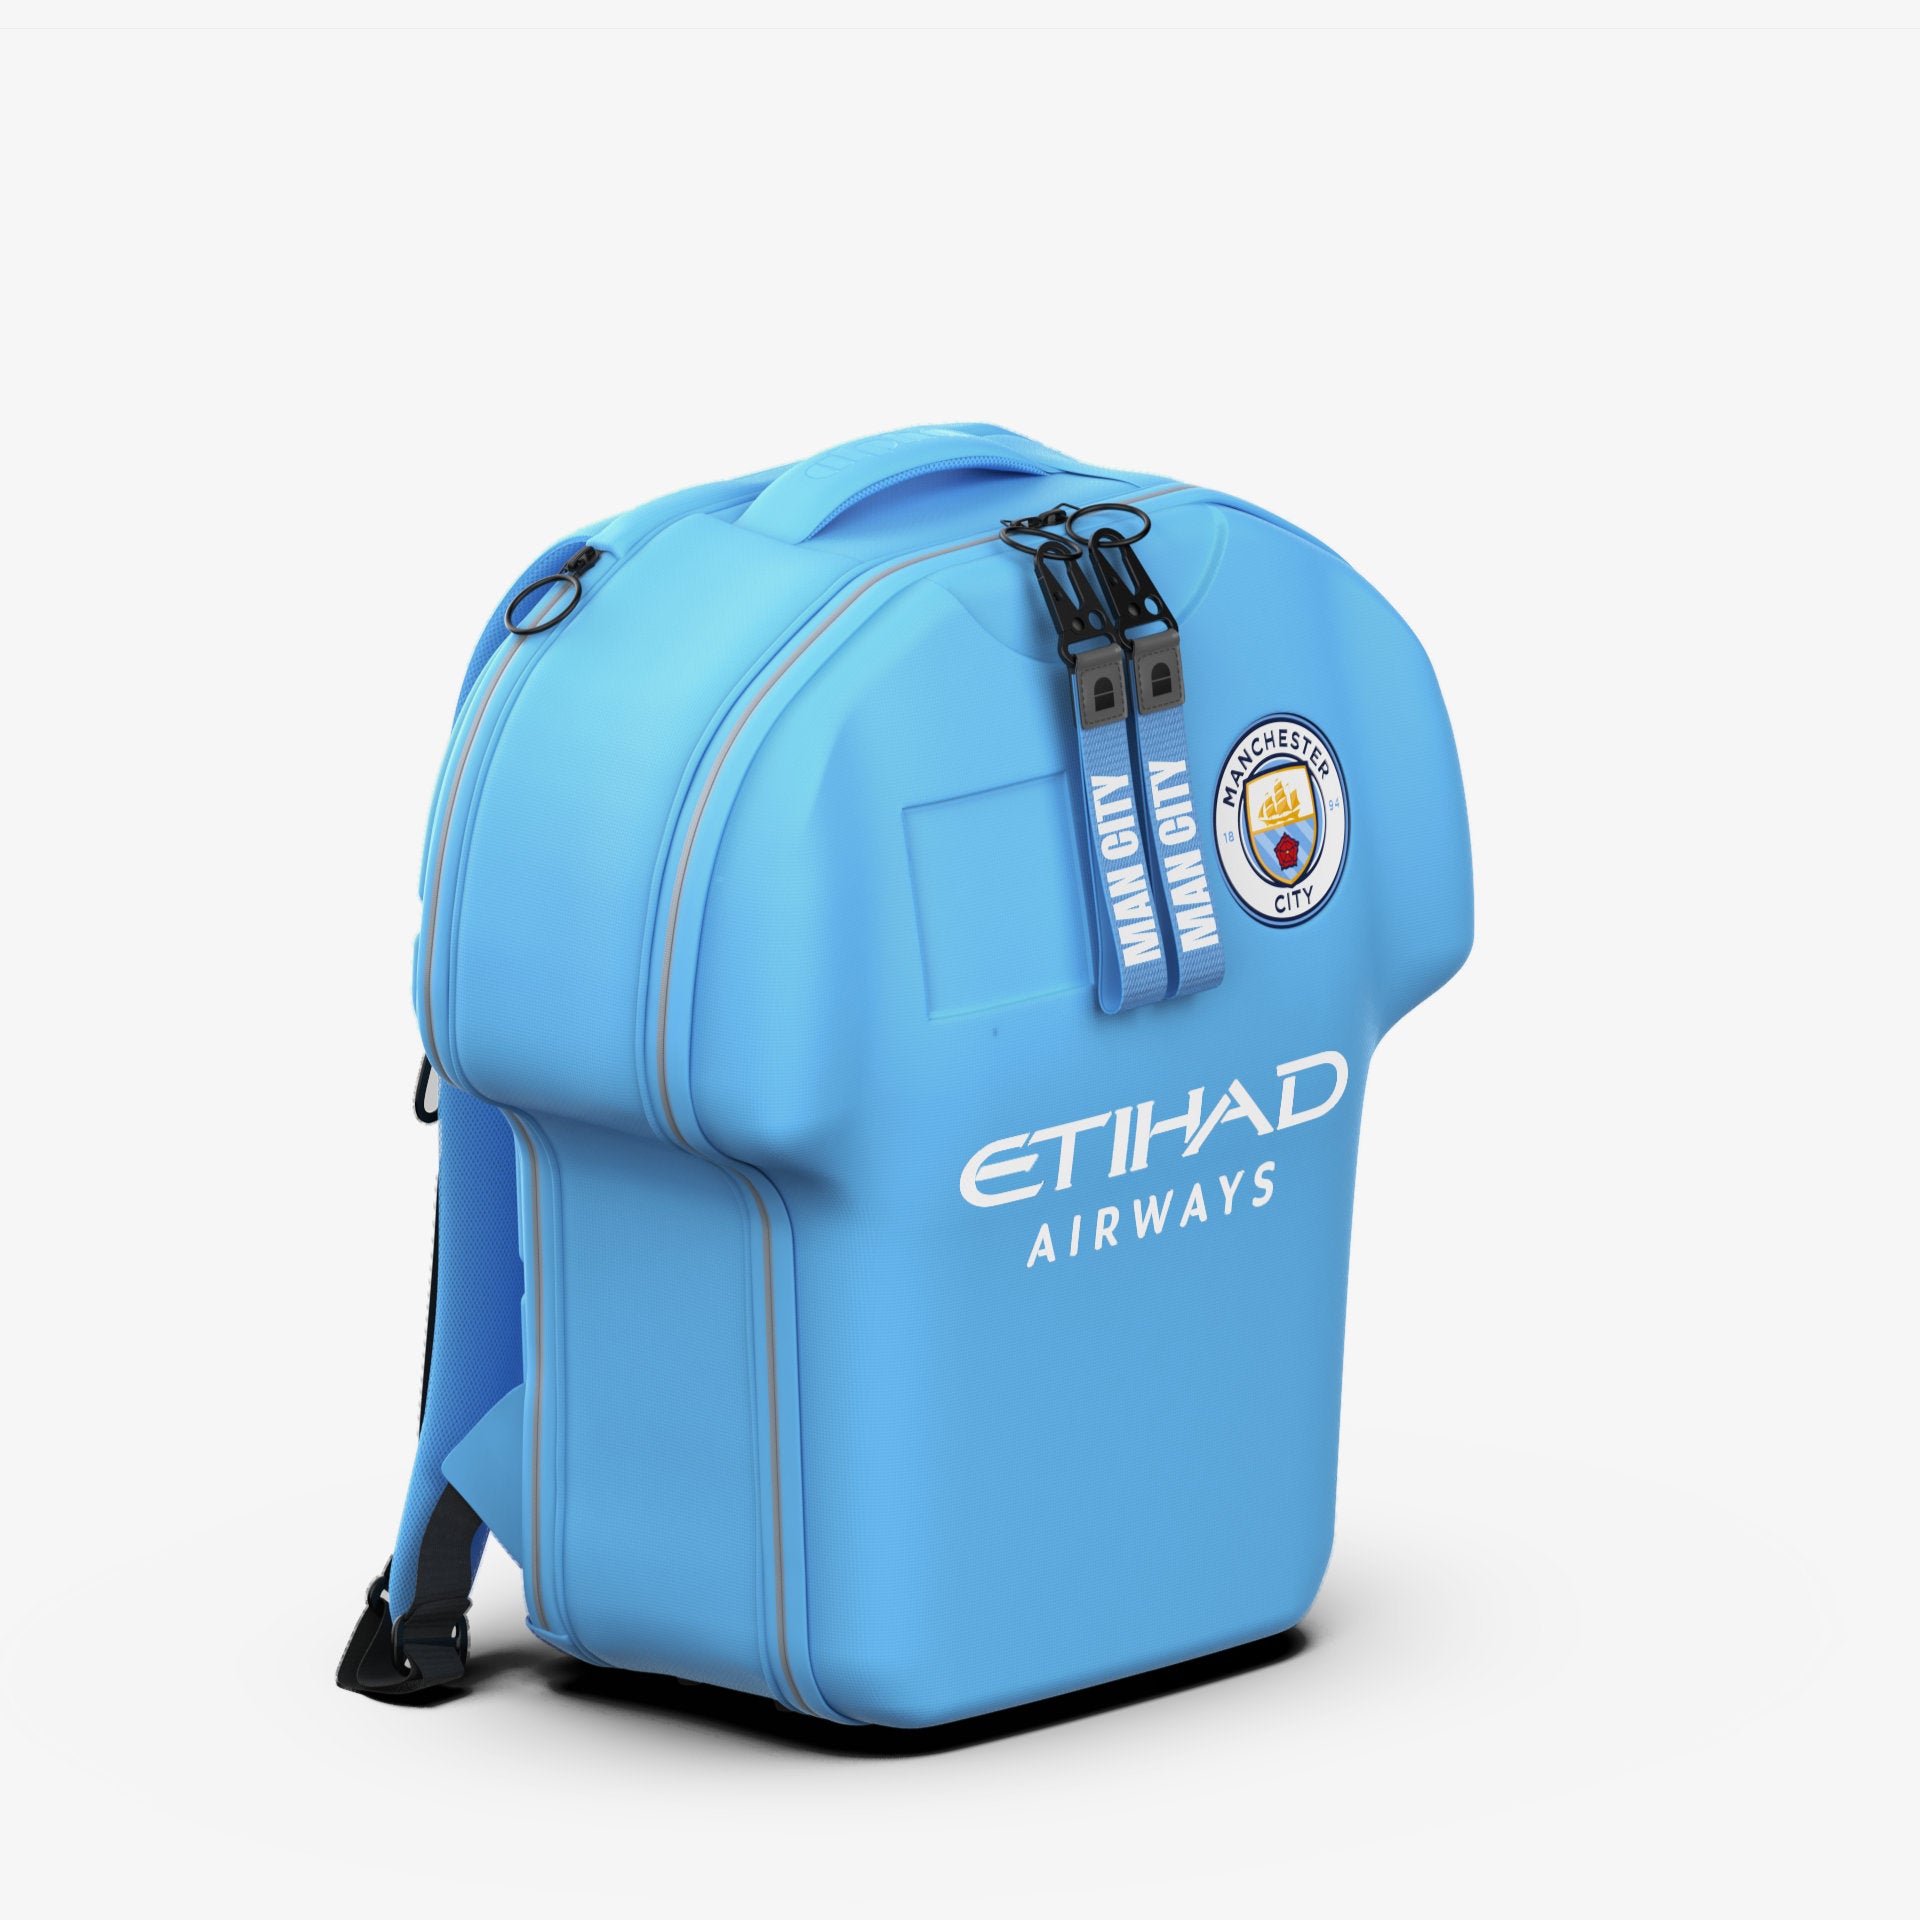 Manchester City backpack size medium